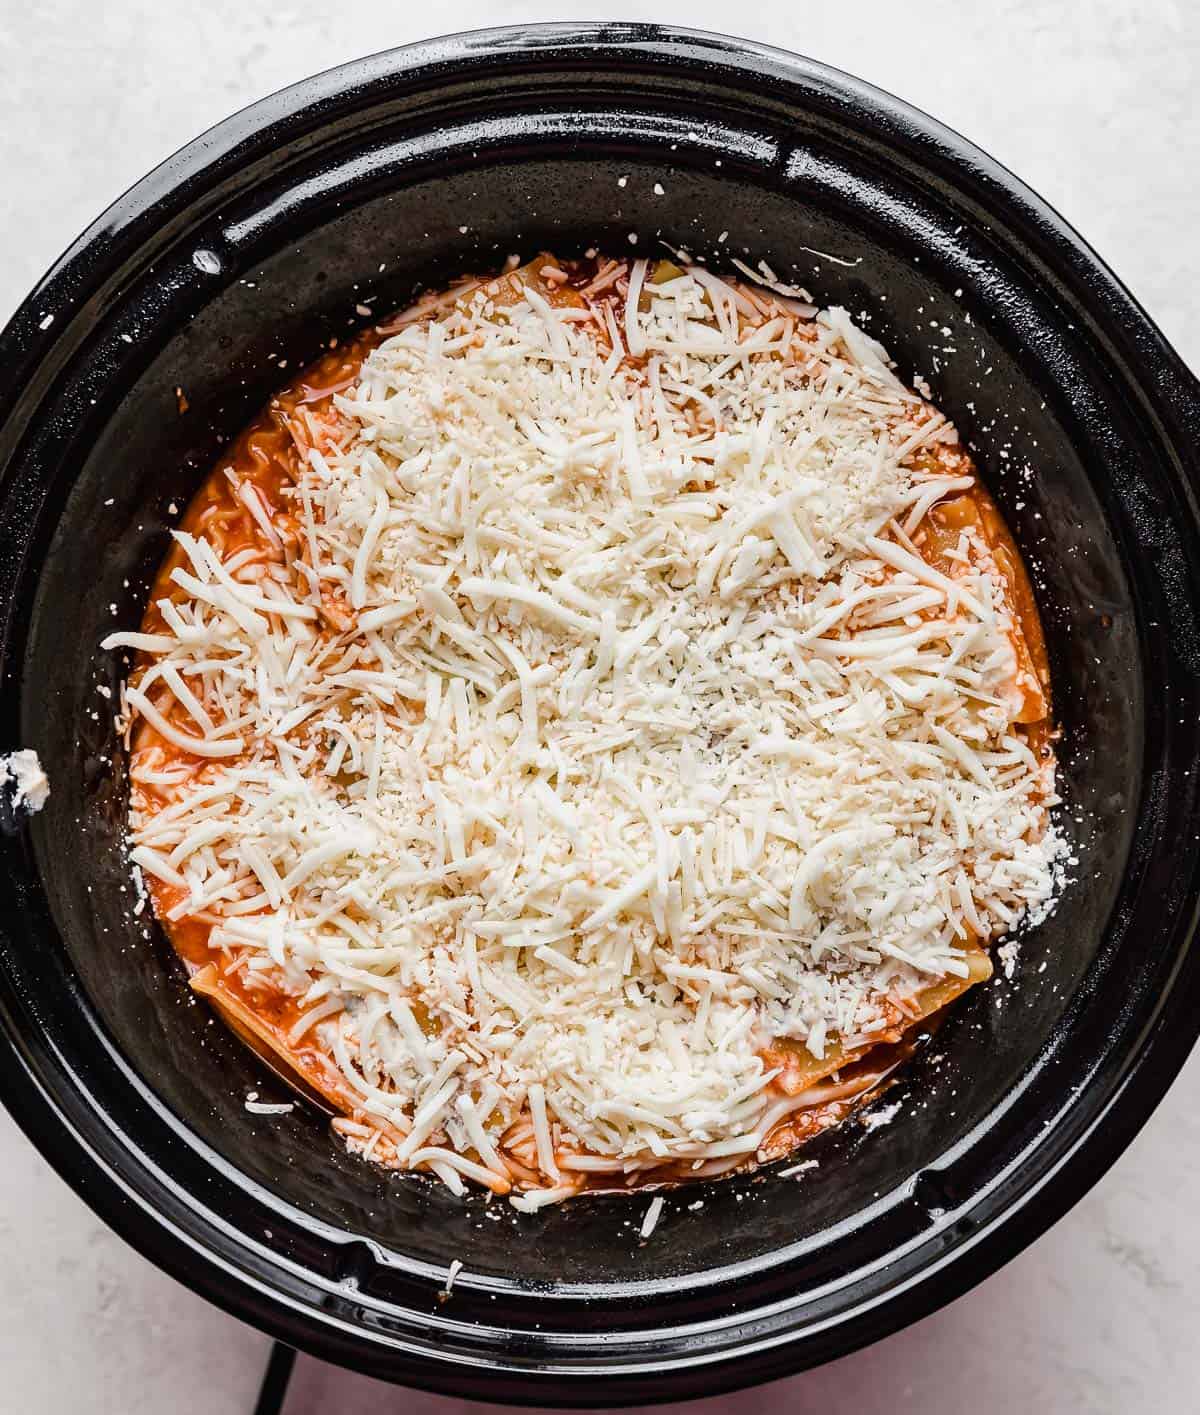 Shredded mozzarella cheese overtop Slow Cooker Lasagna in a round crockpot.